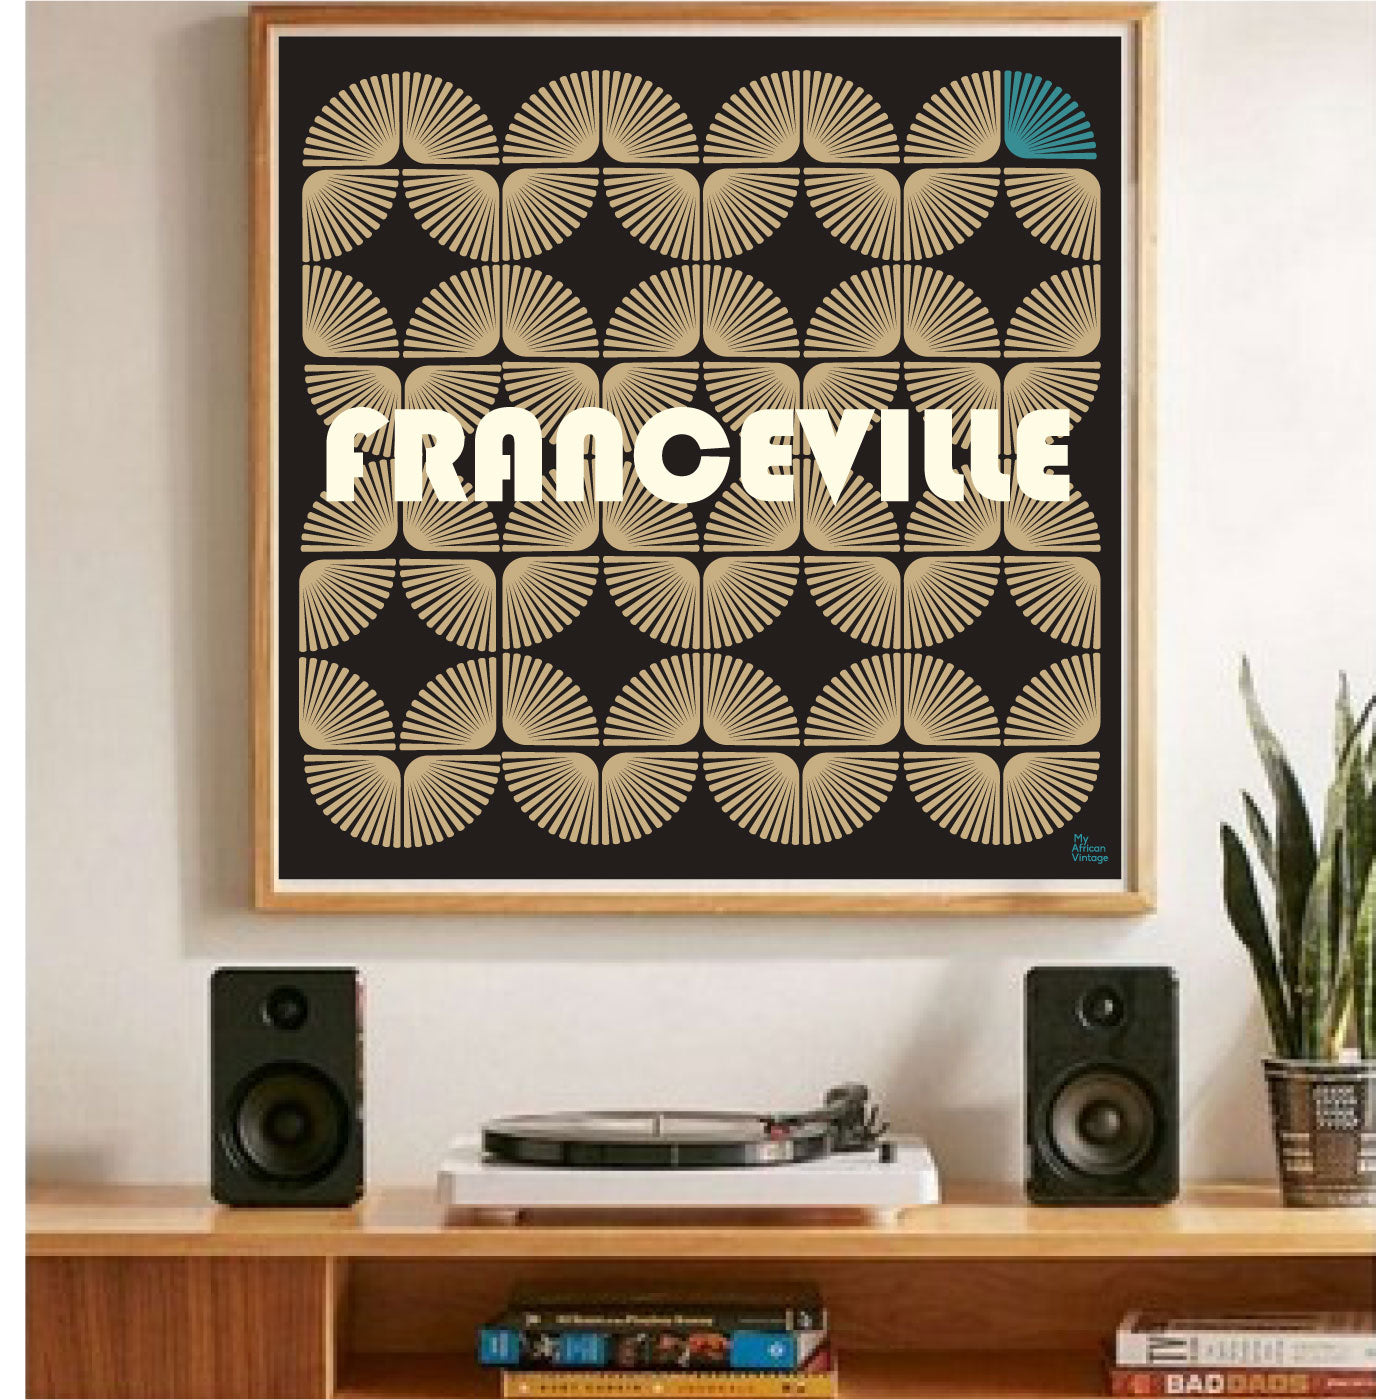 "Franceville" retro style poster - "My African Vintage" collection